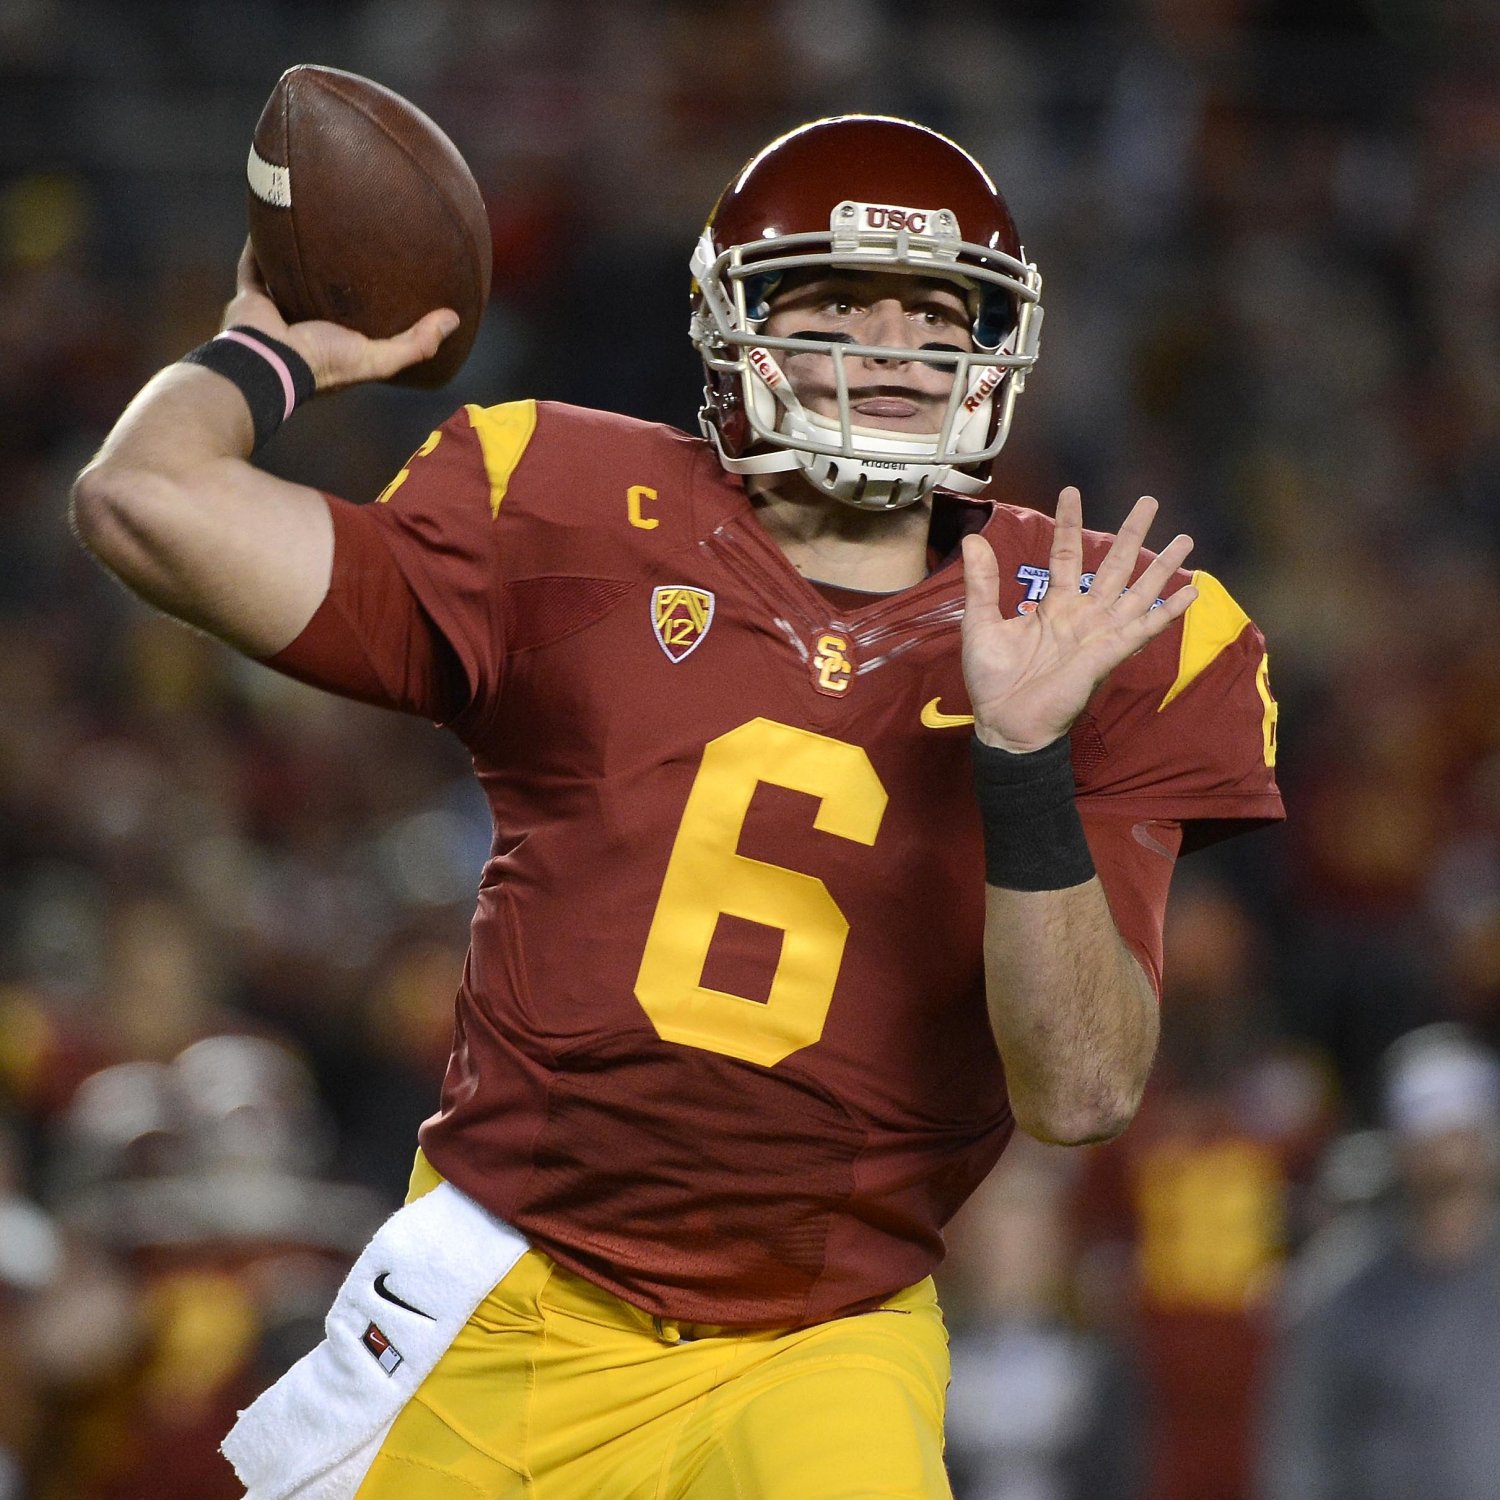 USC Football: Ranking the 10 Most Important Players of 2015 | Bleacher Report